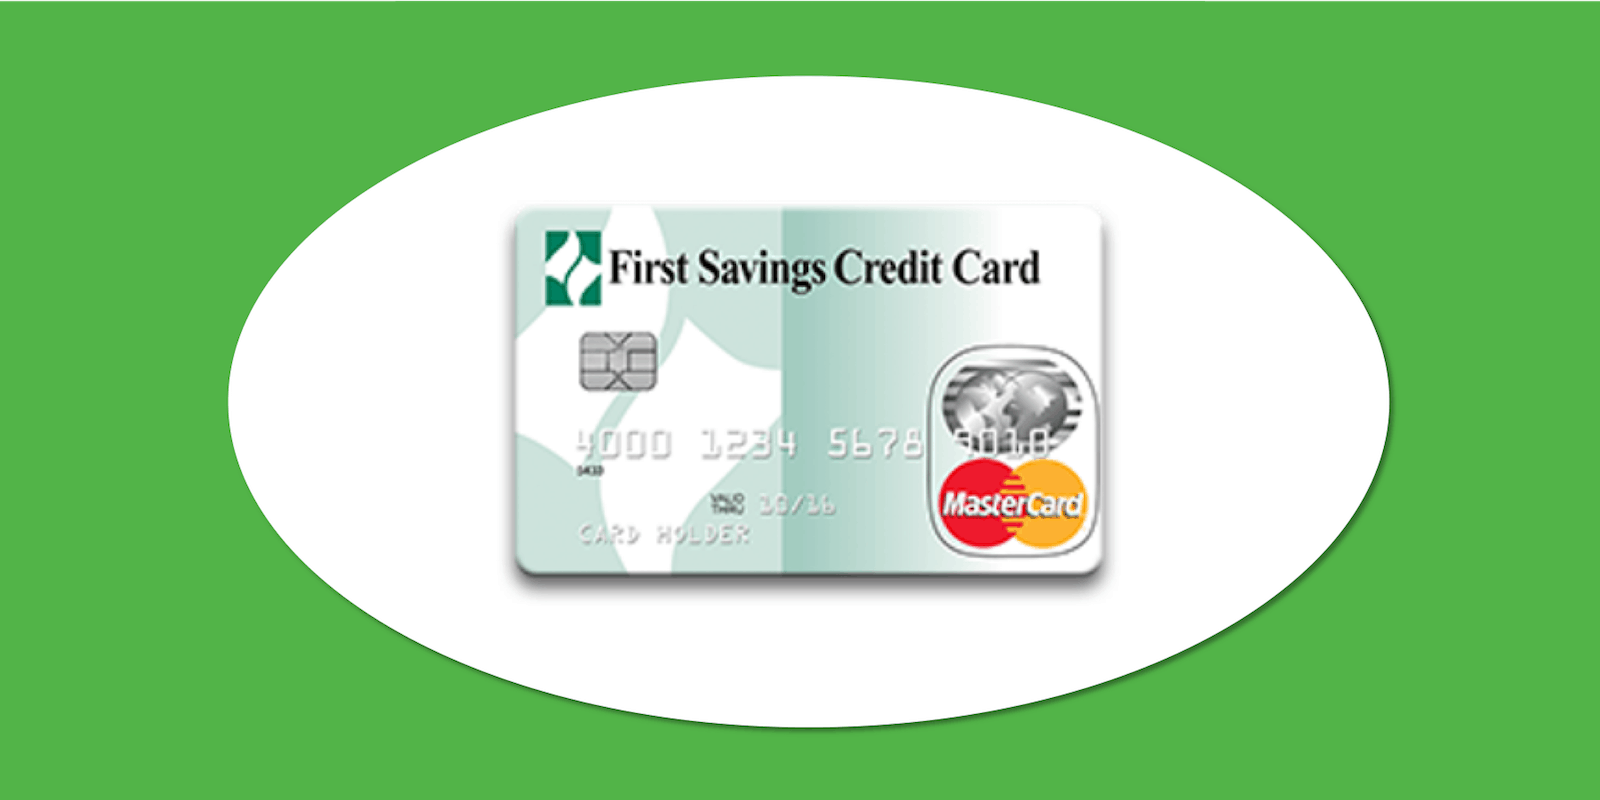 First Savings Credit Card - Feature